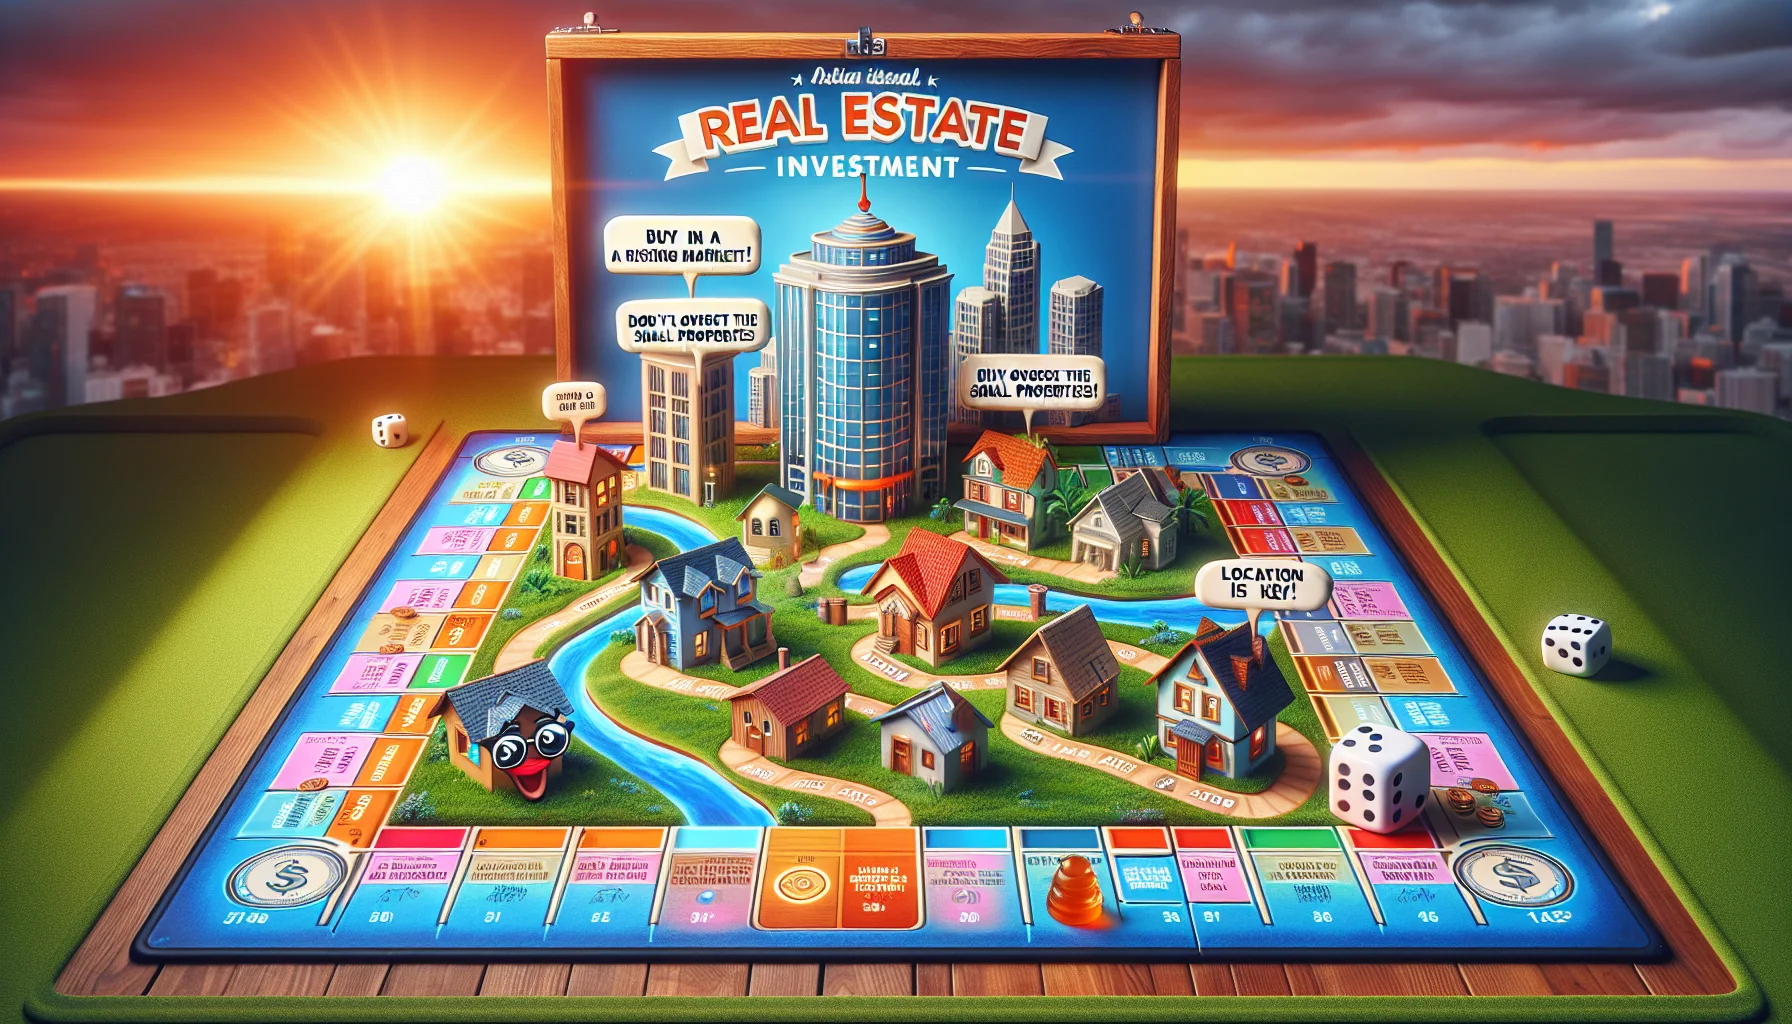 An amusing, hyper-realistic image displaying ideal real estate investment strategies. It comprises a vibrant gameboard spread across an oak table. The gameboard illustrates a fictional, flawless city, filled with various types of properties. Each property on the board has a humorous cartoon mascot, emanating funny tips, such as a skyscraper with glasses reading 'Buy in a rising market,' a small shack with a sign saying 'Don't overlook the small properties!', and a mansion standing proud stating 'Location is key.' A pair of dice rolling across the board signifies taking calculated risks in investments. The setting sun in the backdrop of the game brings a dramatic effect.